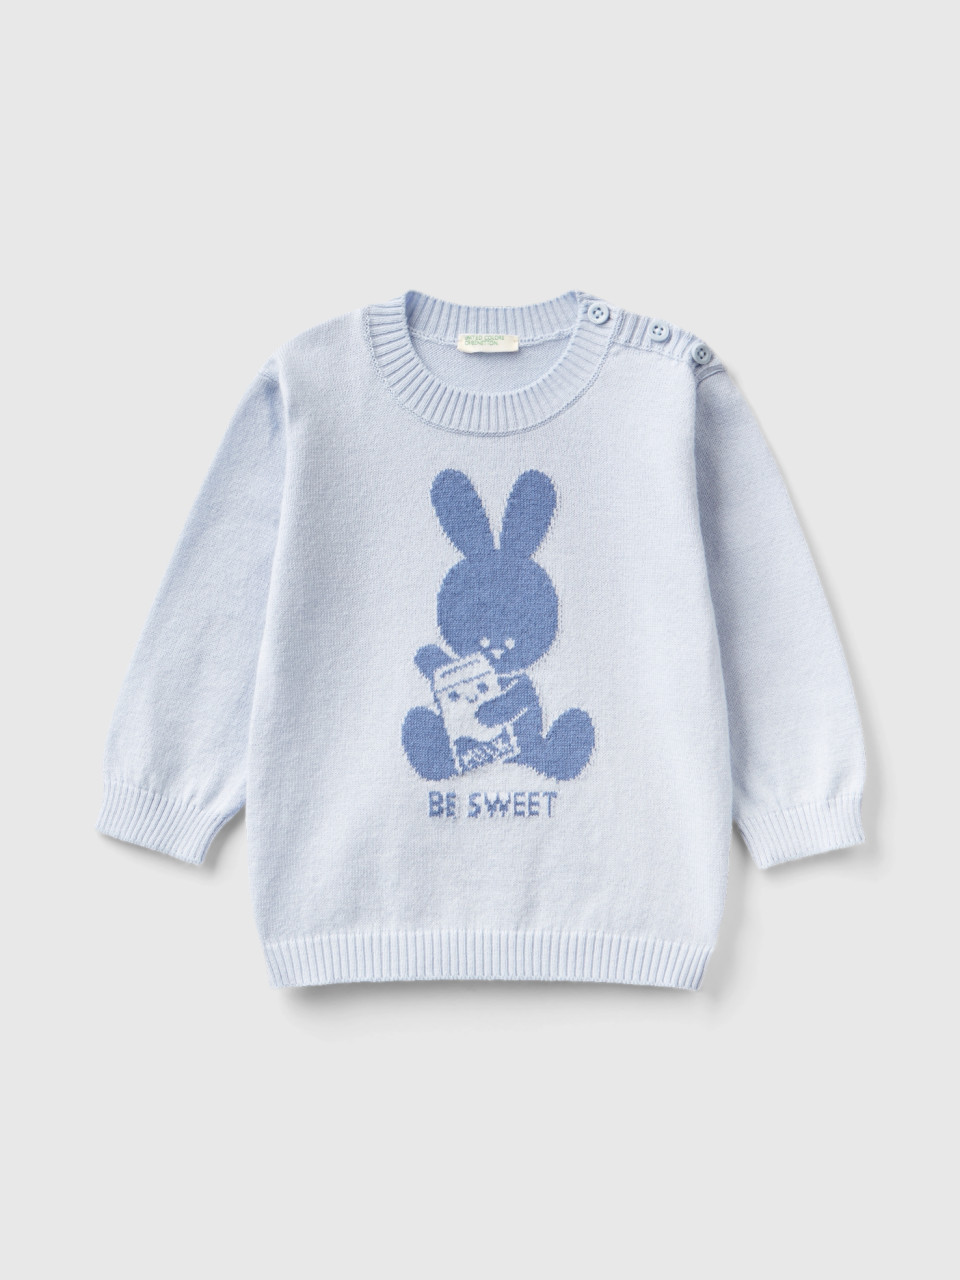 Benetton, Warm Cotton Sweater With Inlay, Sky Blue, Kids